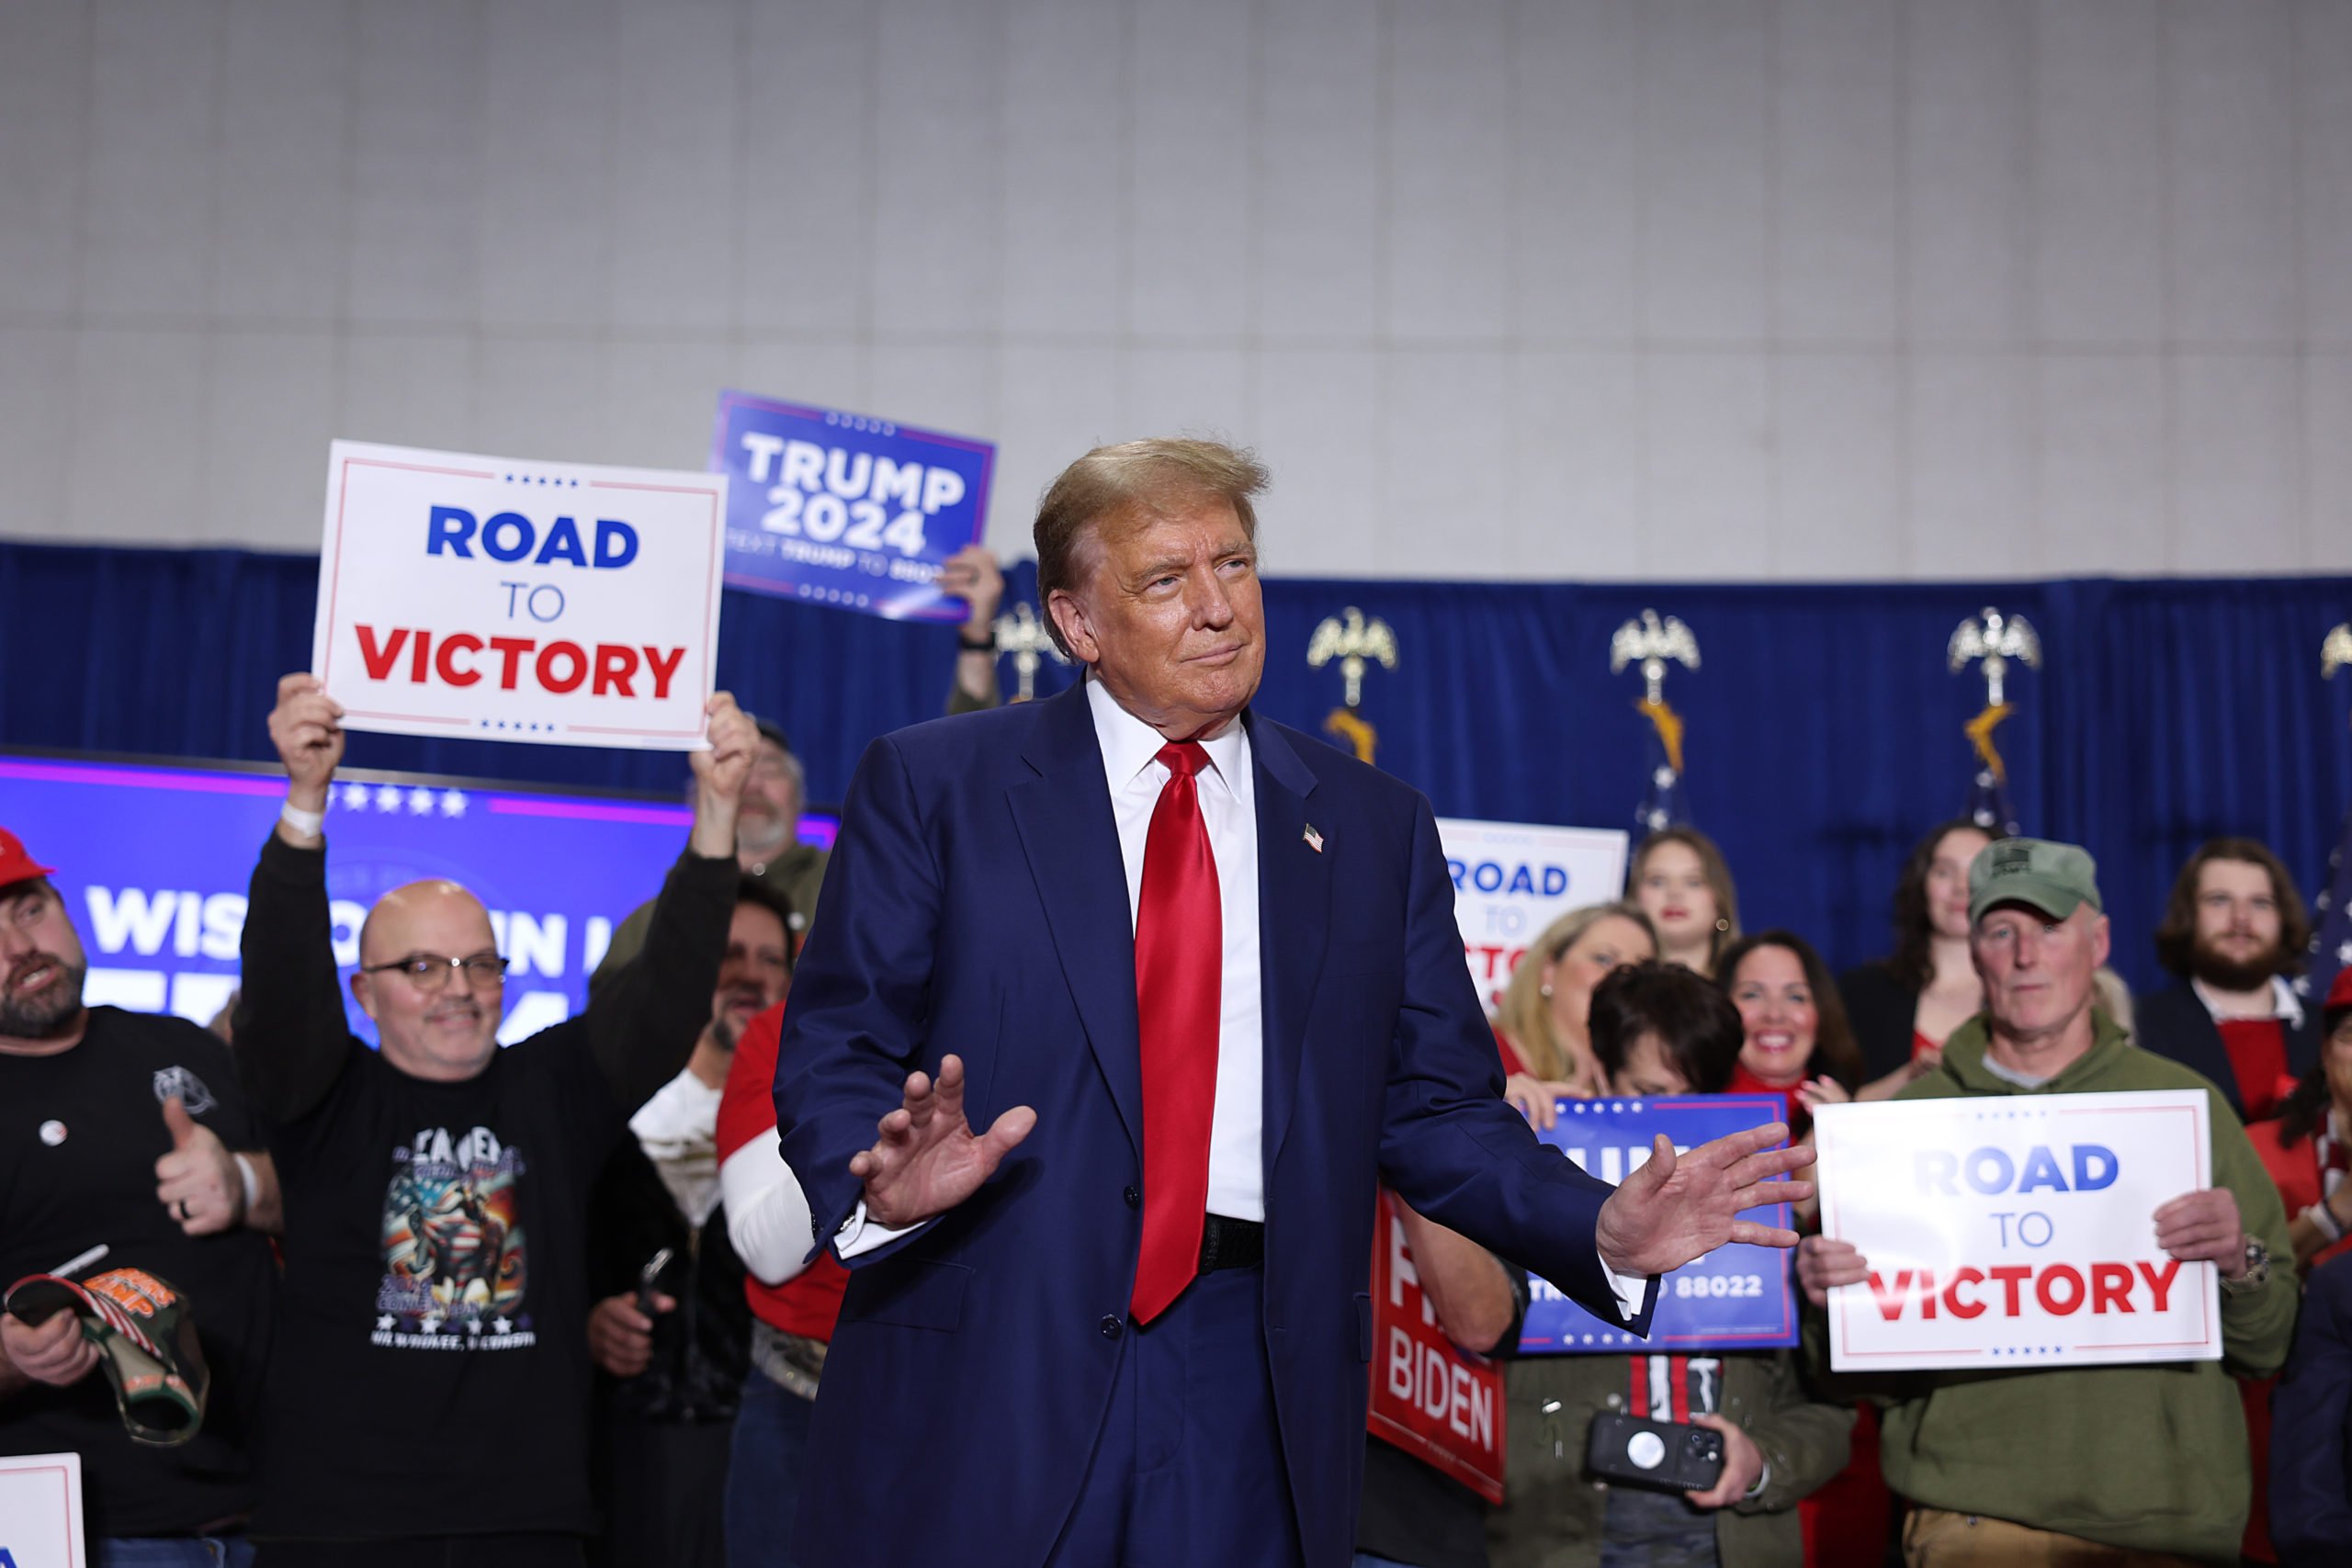 Former President Donald Trump arrives for a rally on April 02, 2024 in Green Bay, Wisconsin. At the rally, Trump spoke next to an empty lectern on the stage and challenged President Joe Biden to debate him. The Wisconsin primary is being held today. (Photo by Scott Olson/Getty Images)